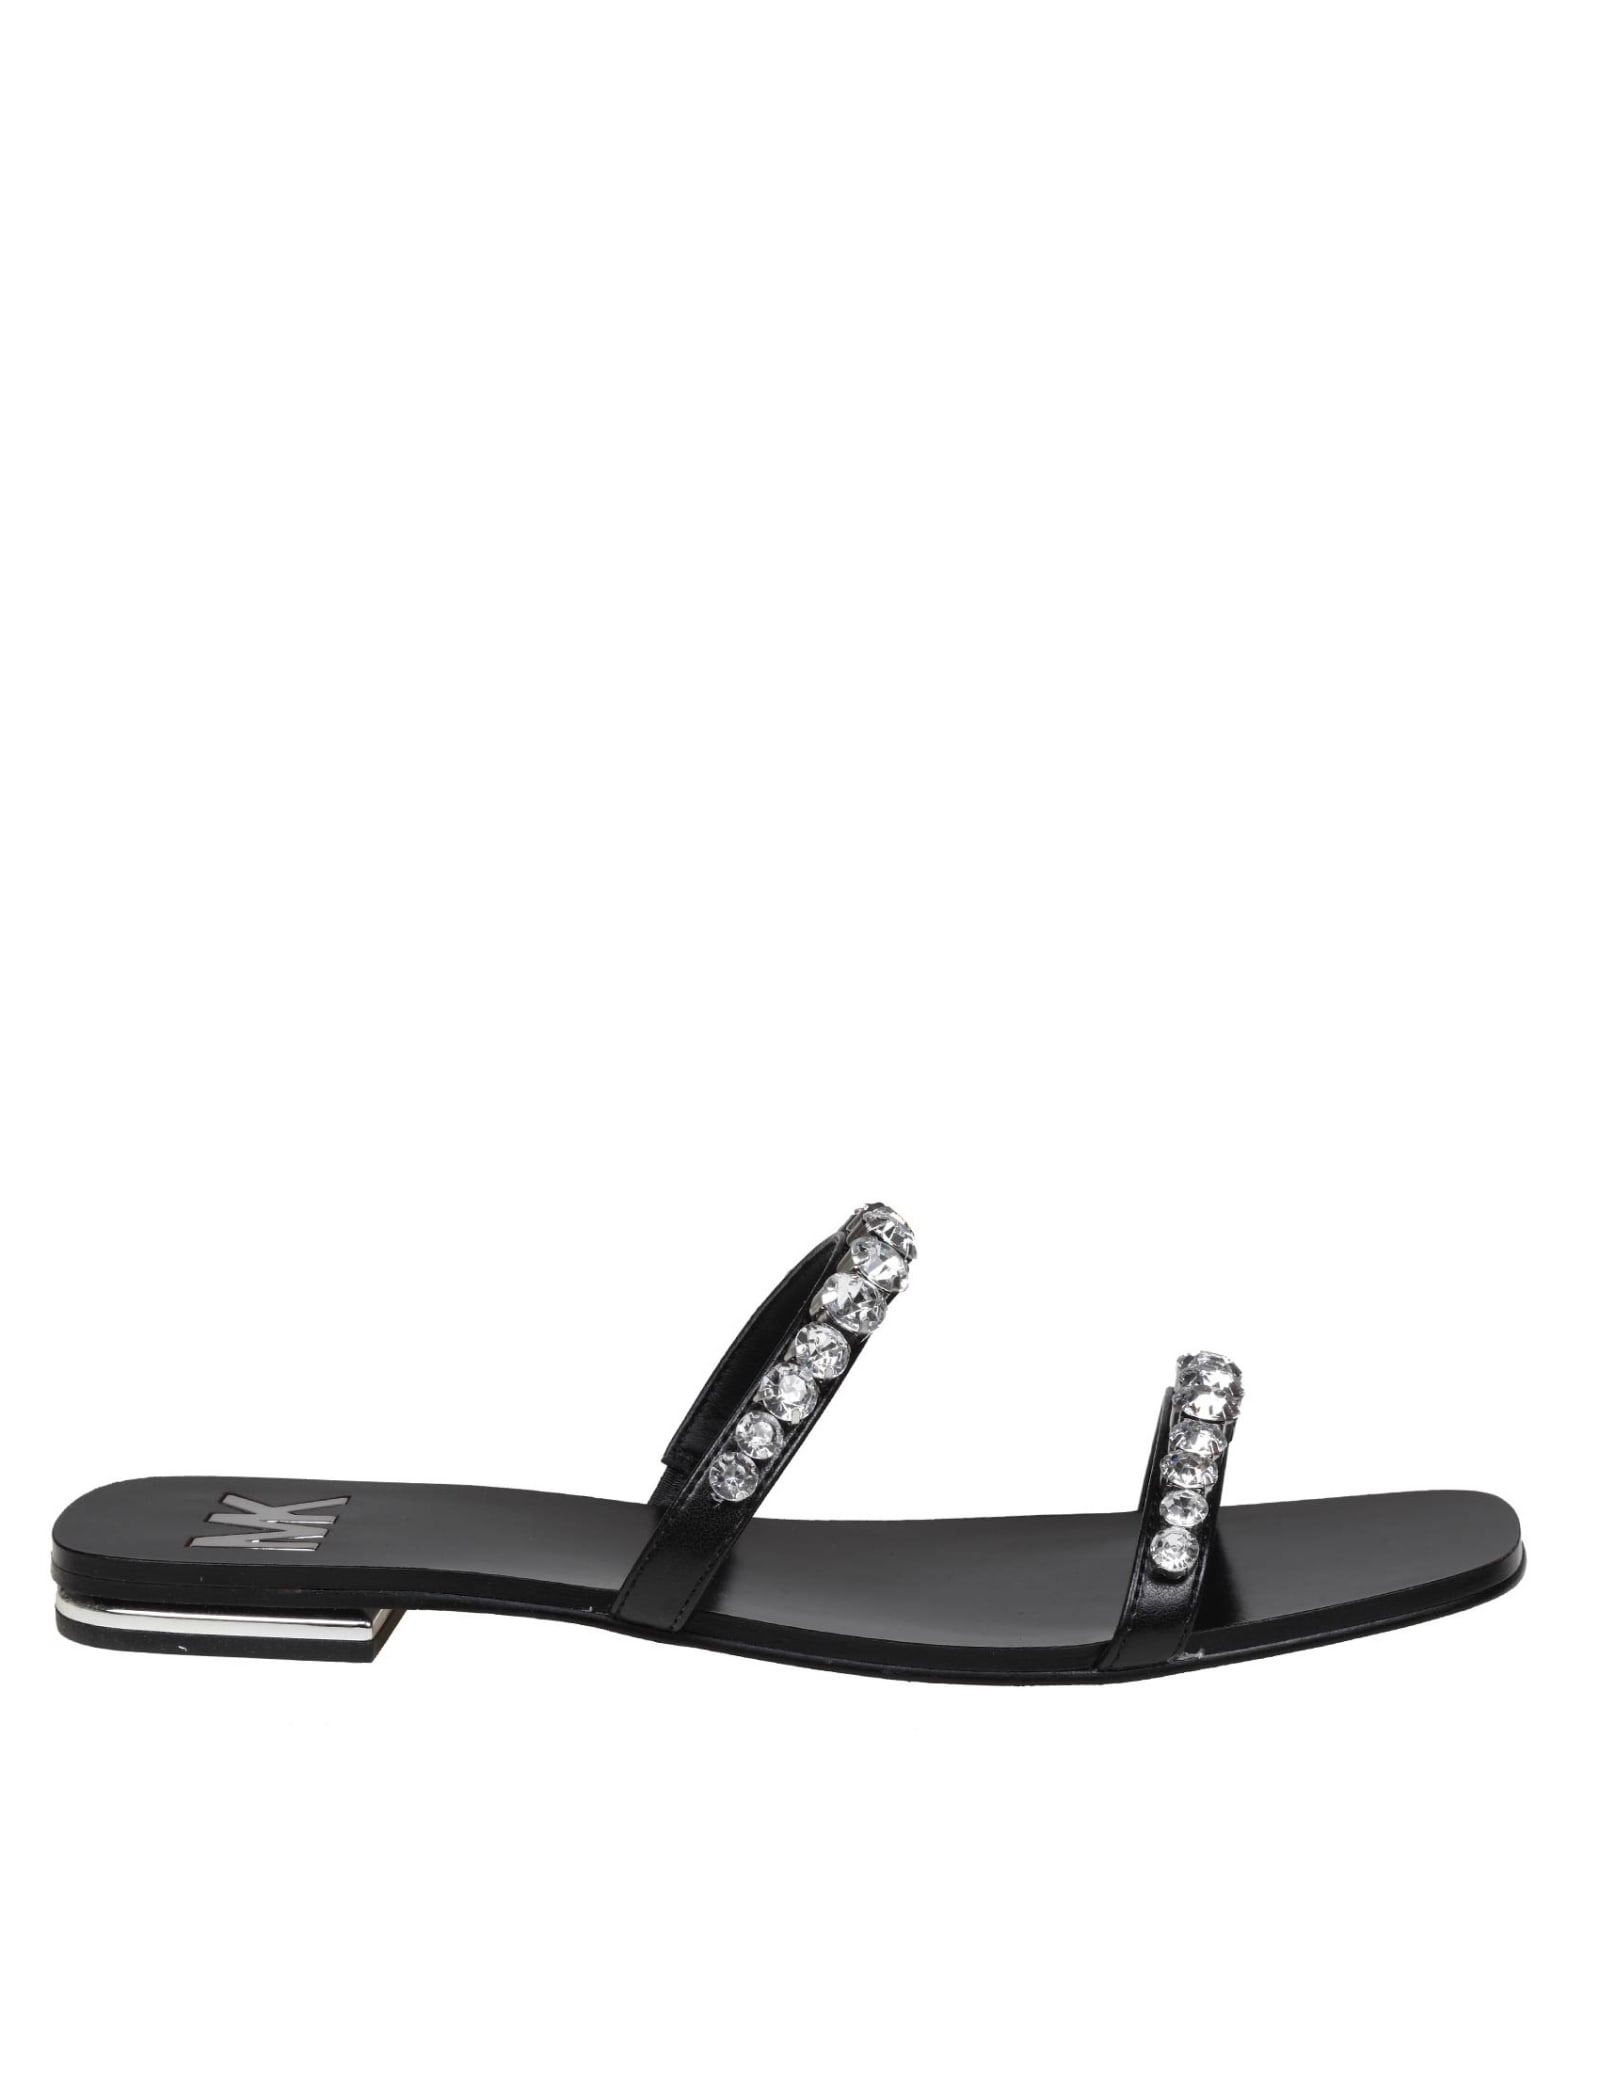 Michael Kors Jessa Flat Leather Sandals With Crystals